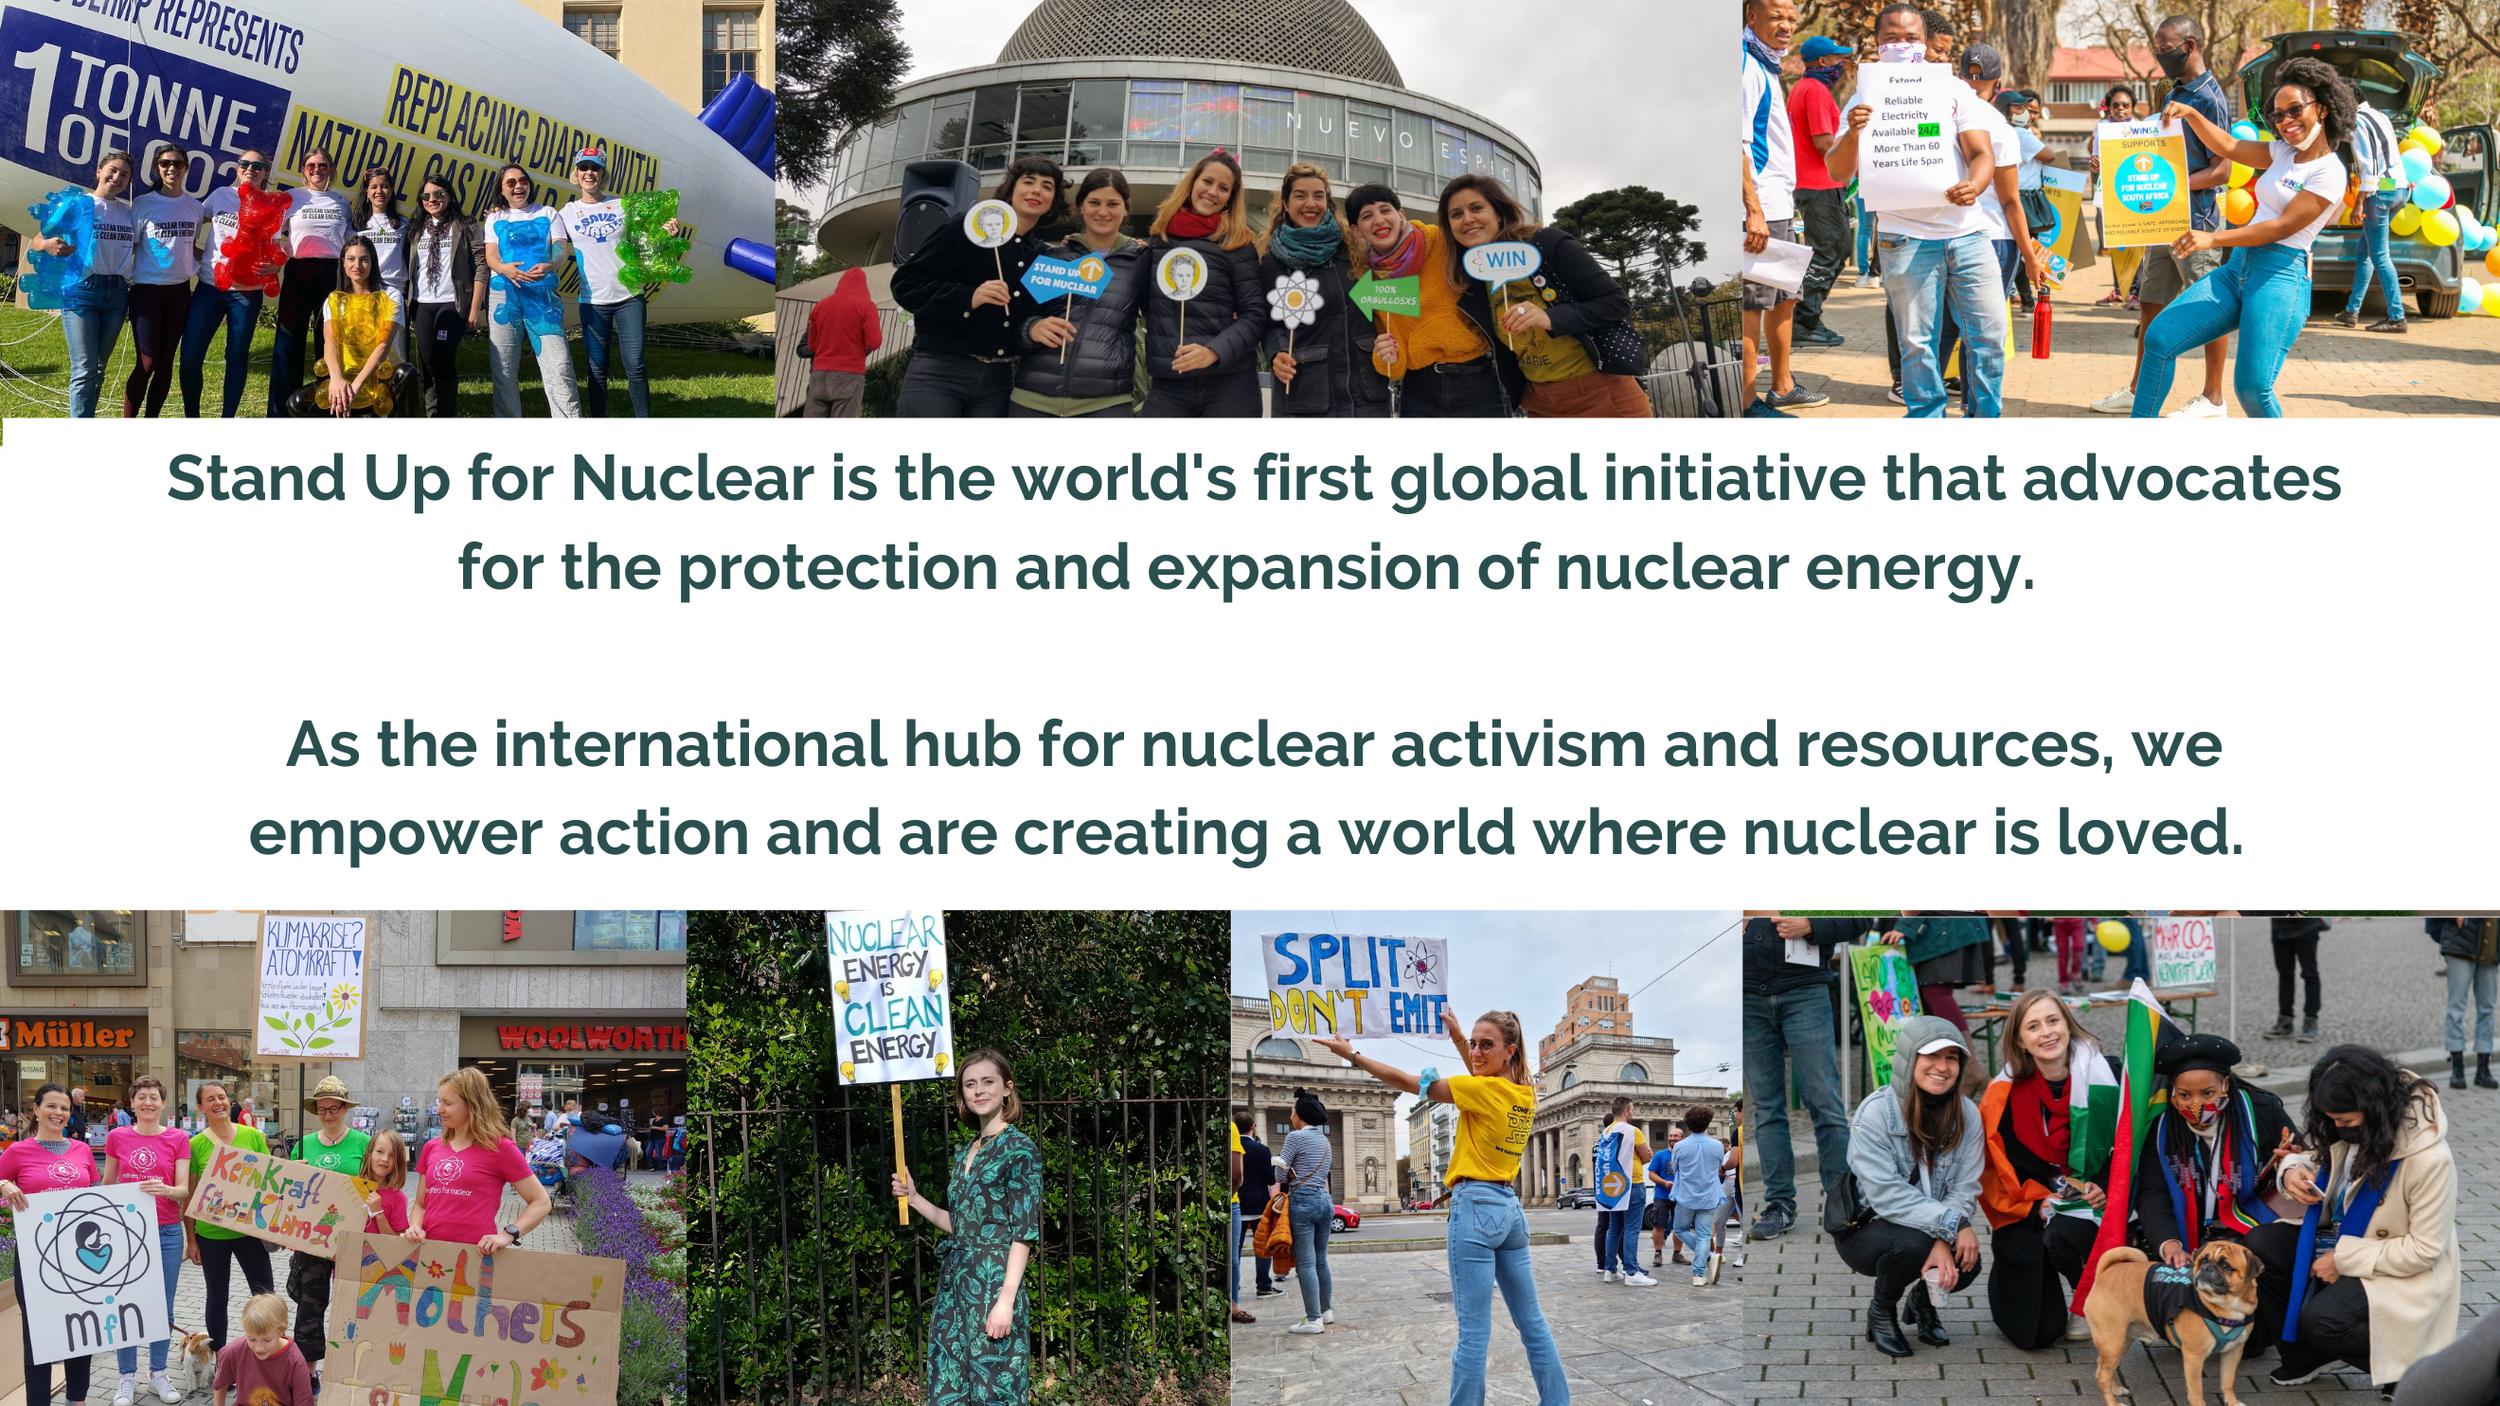 Stand Up For Nuclear Brazil